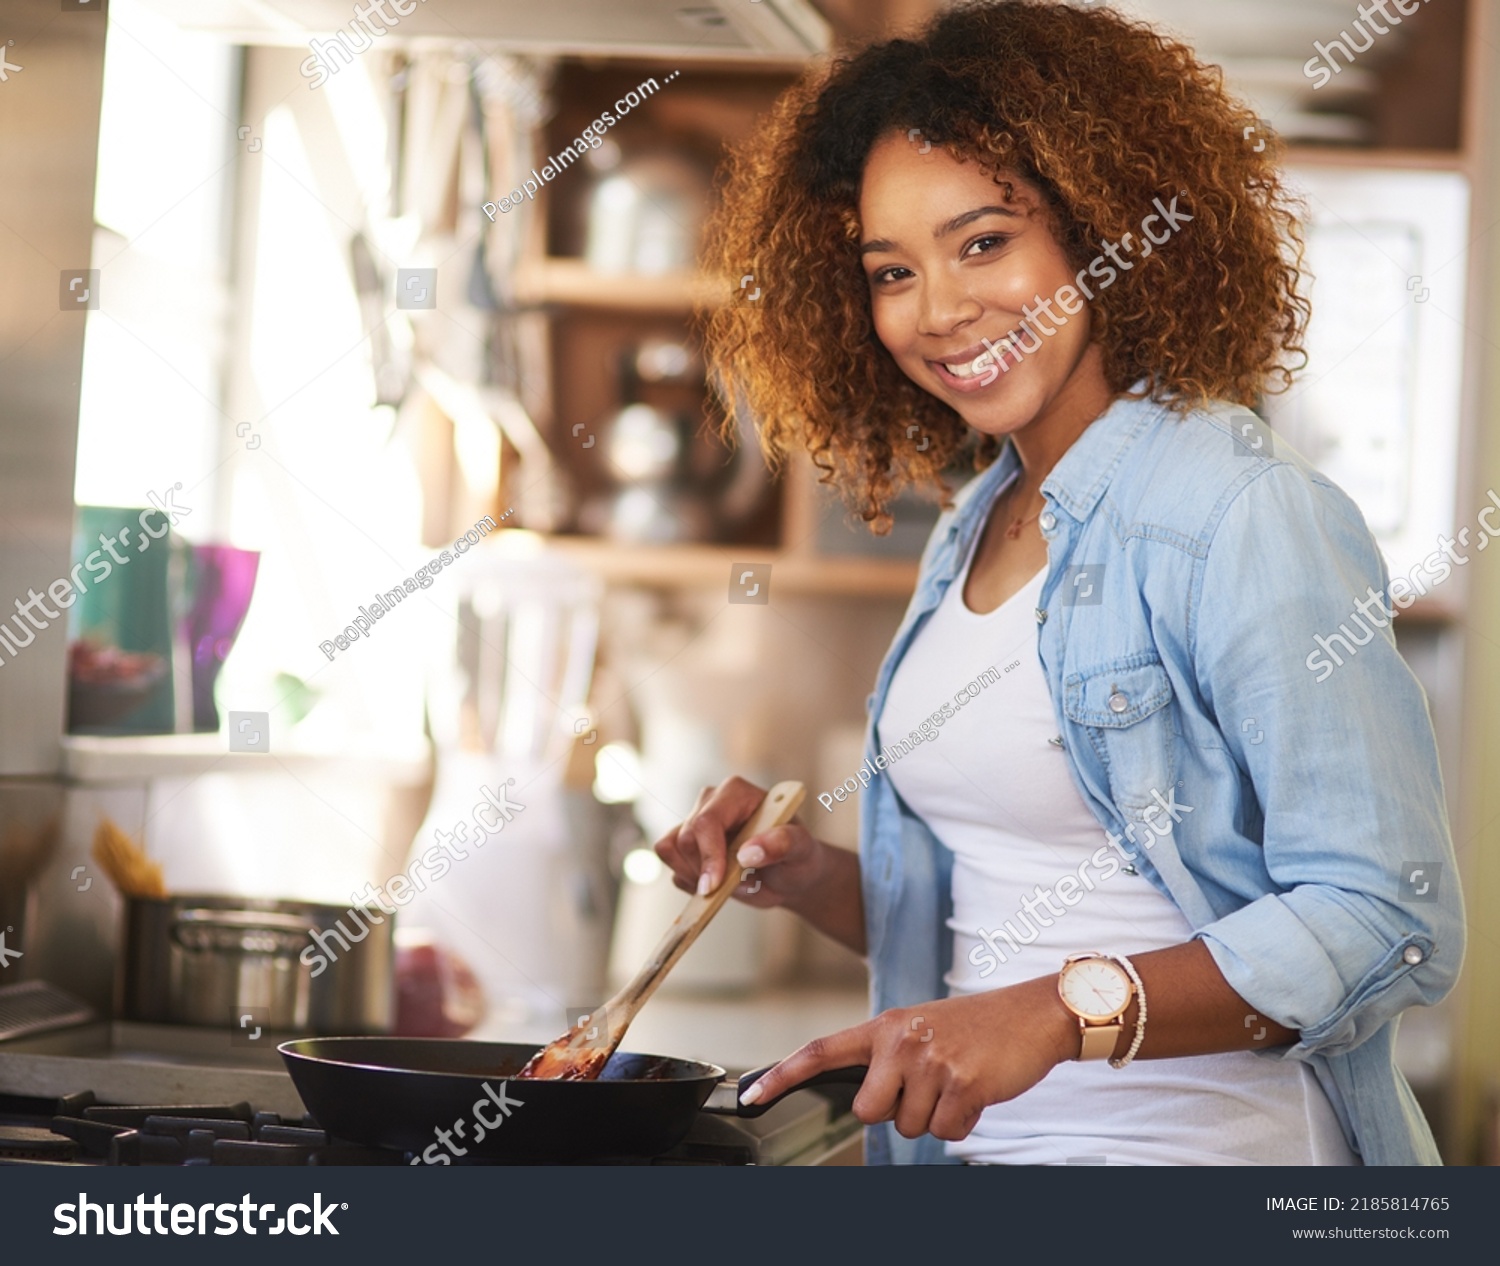 Whipping up something delicious just for you. Portrait of a happy young woman preparing a meal on the stove at home. #2185814765